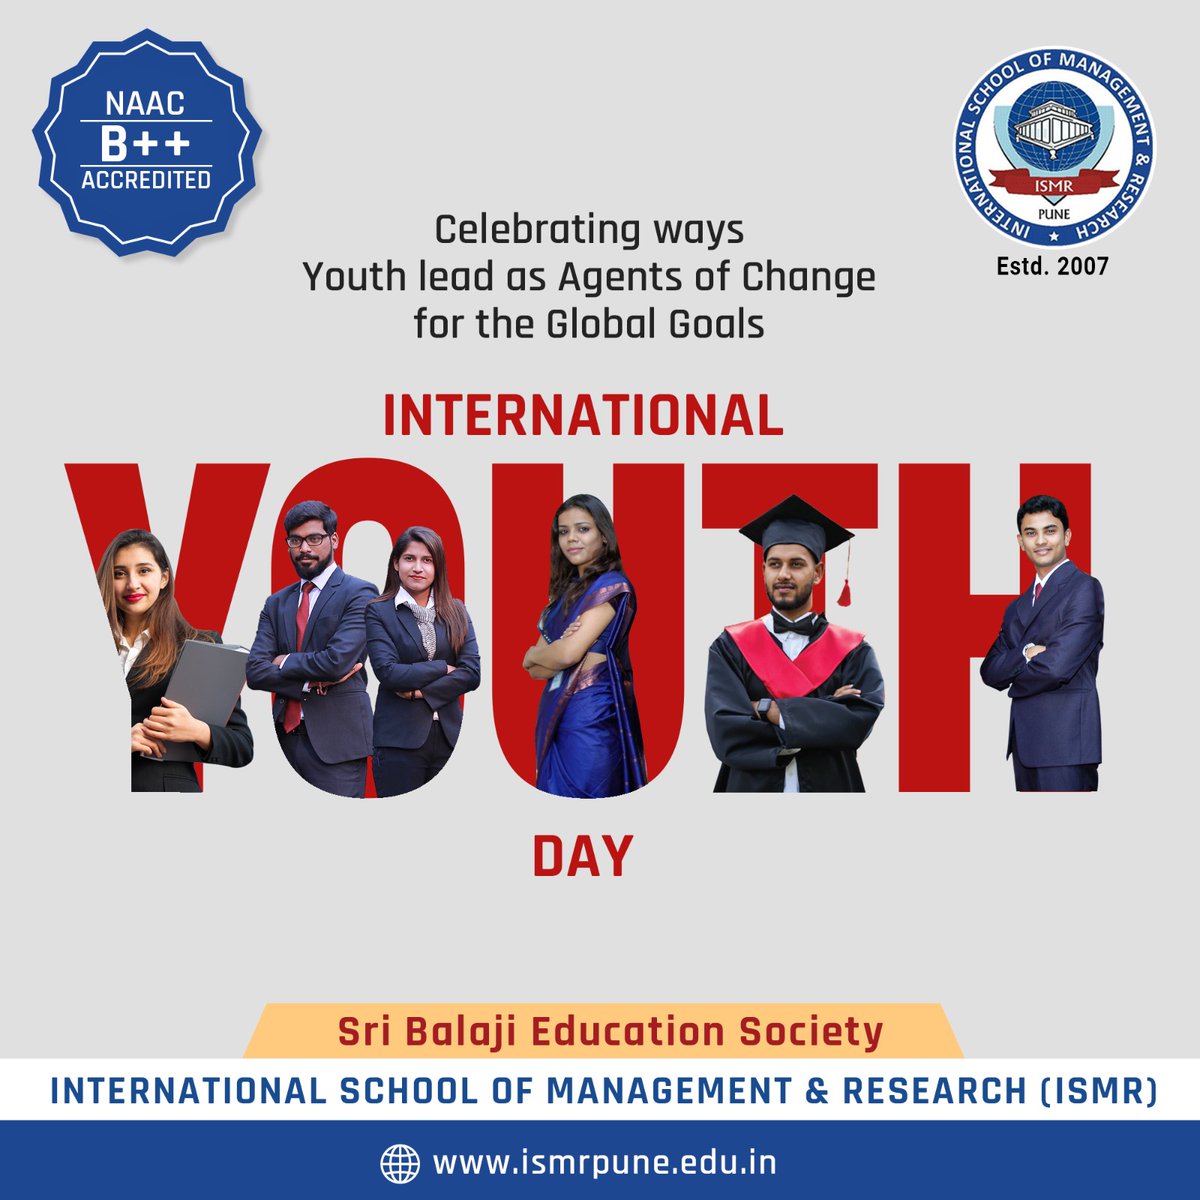 🚀 From #classrooms to communities, Youth's passion and #innovation shape a brighter world. #Celebrating Young Change-makers as #Catalysts for #GlobalChange on #InternationalYouthDay 🌍🌟 

#ISMR #YouthForChange #AgentsOfGlobalGoals #YouthEmpowerment #GlobalChangeMakers